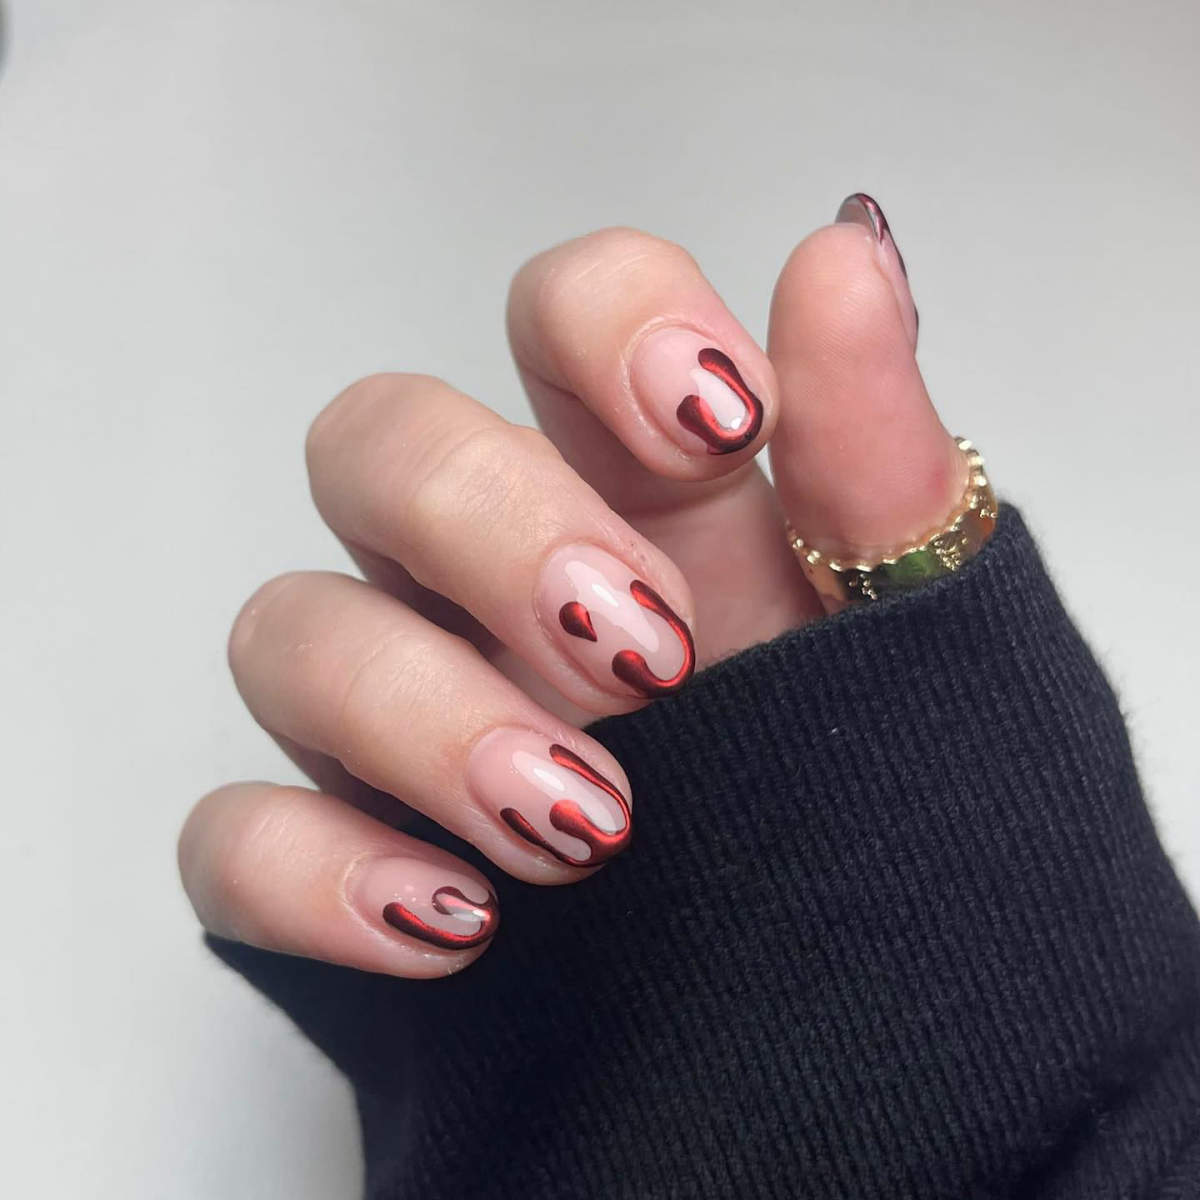 bloody nails designs